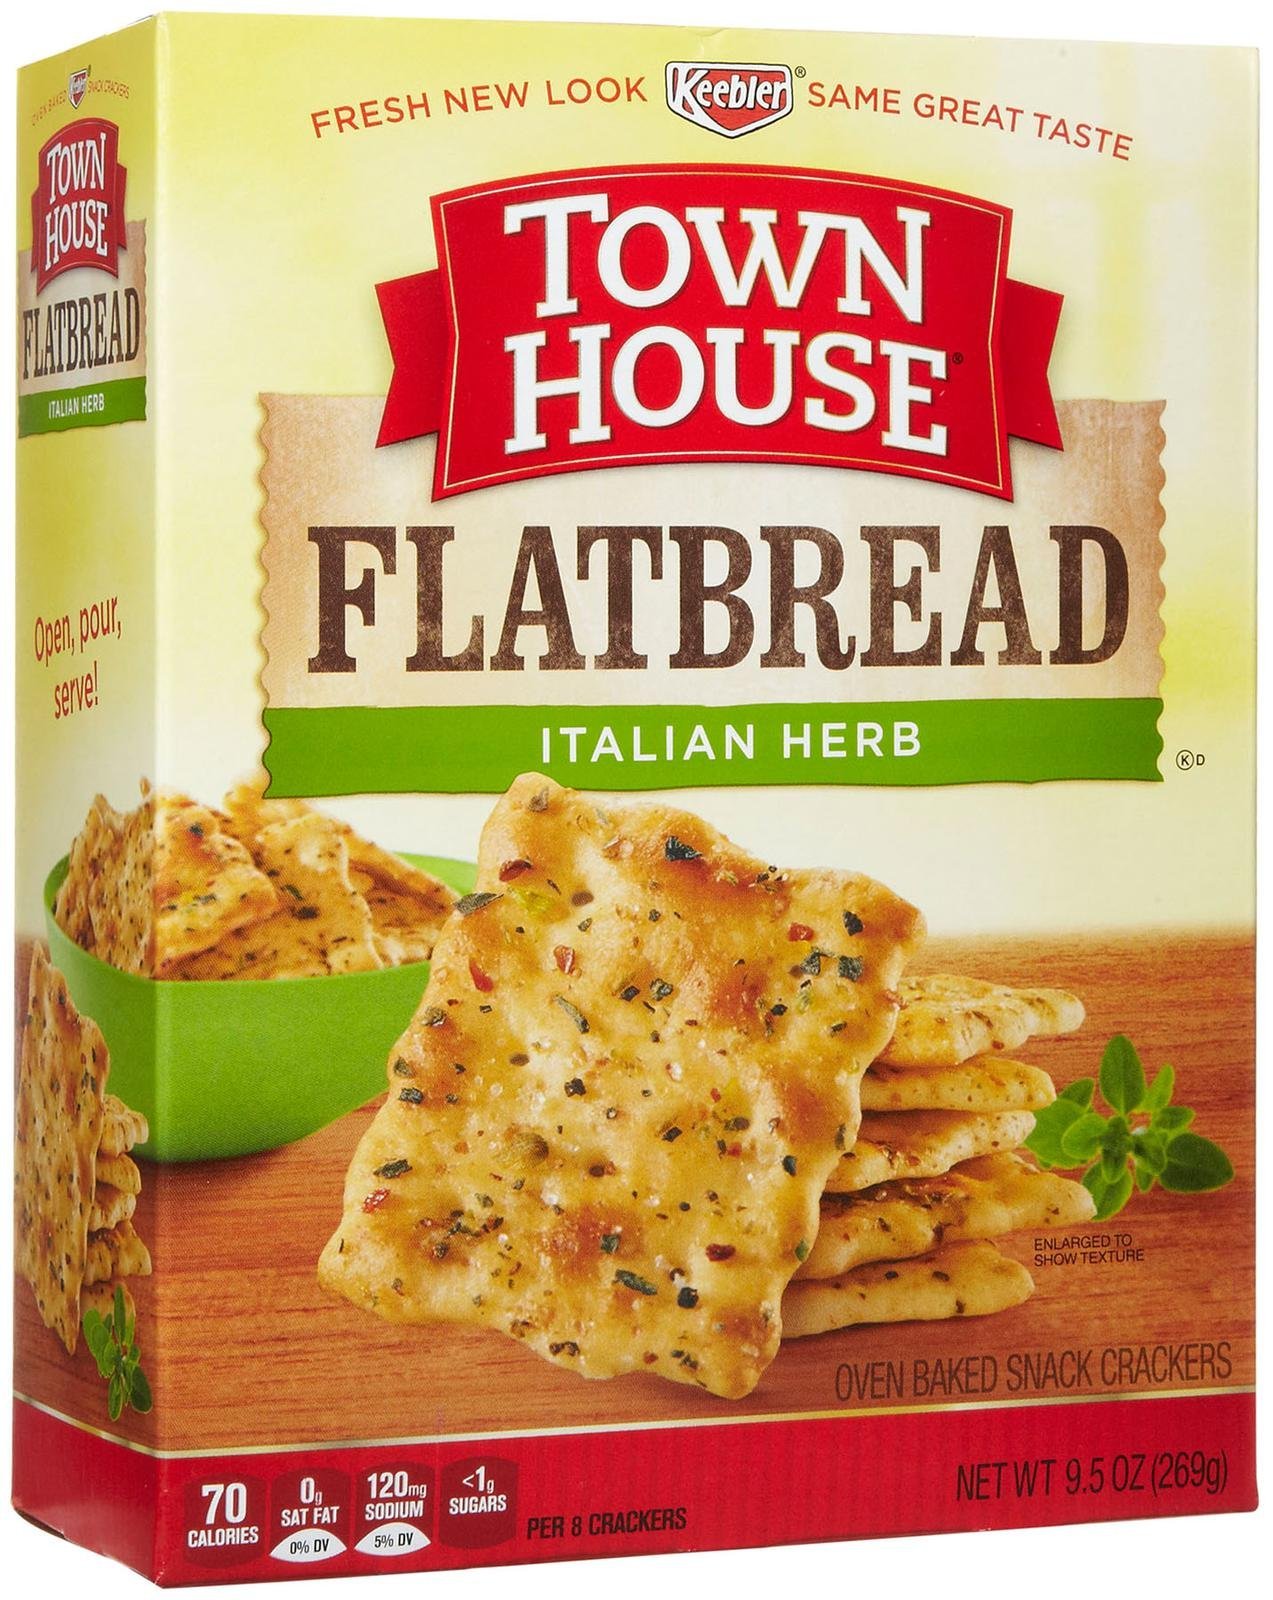 Keebler Town House Town House Flatbread Crackers - Italian Herb - 9.5 Oz - image 1 of 2